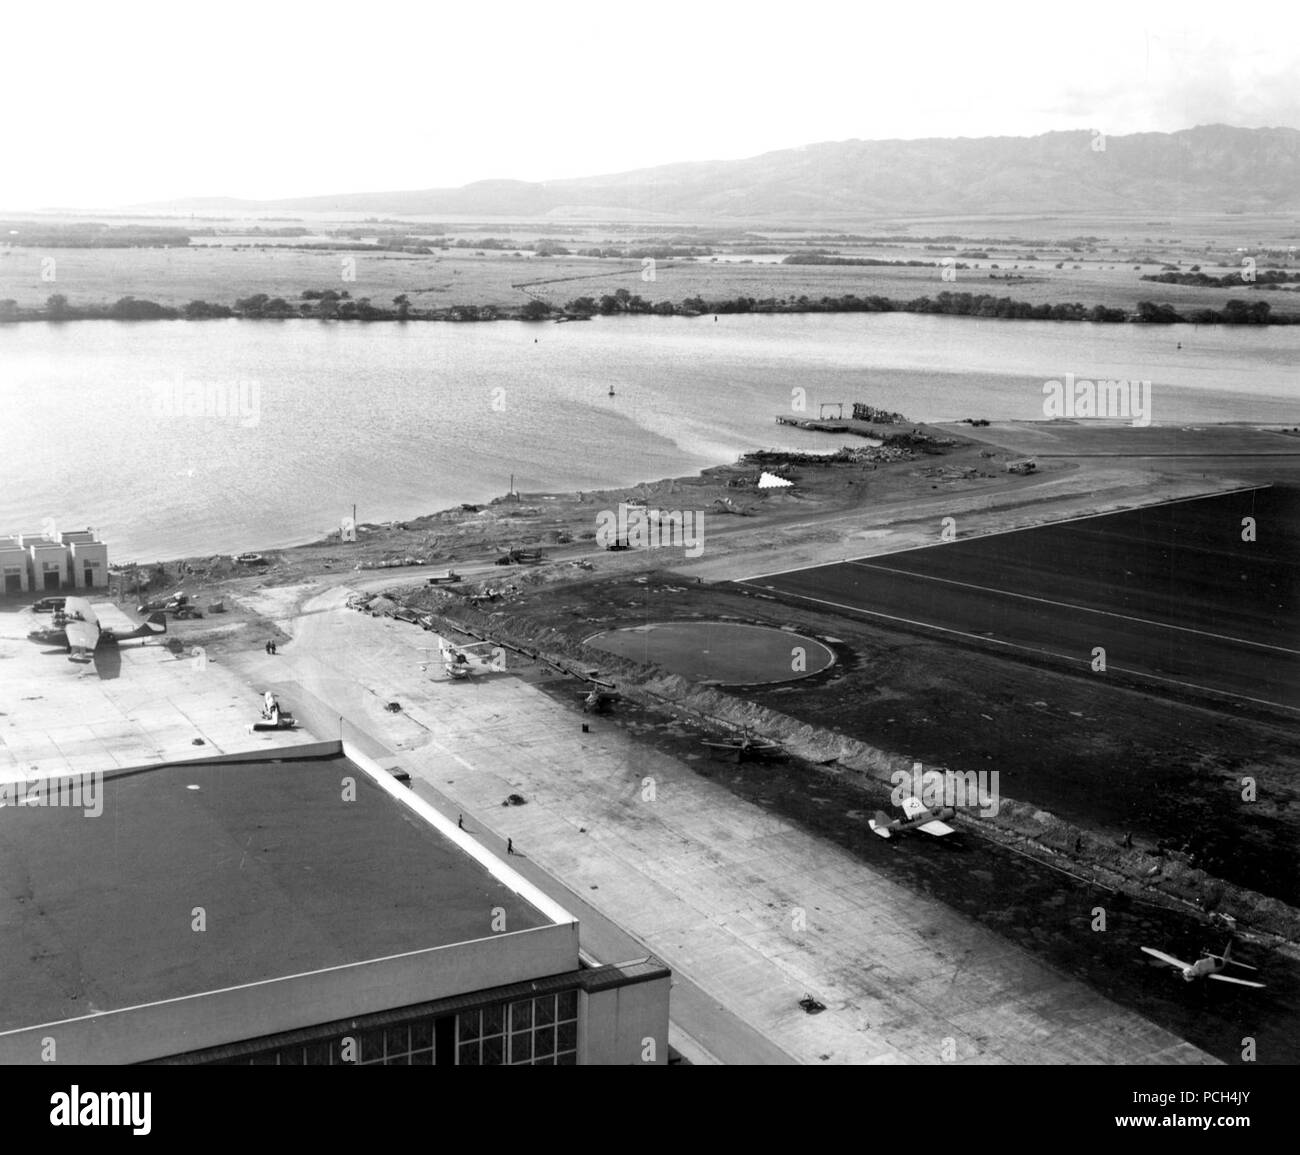 View looking toward the southern end of Ford Island on 8 December 1941, the day after the Japanese raid on Pearl Harbor. Planes present include at least seven OS2U, two SOC, one PBY-5, one F4F-3 and two TBD-1s. One of the TBDs may be Bureau # 0289, which was flown by Ensign Theodore W. Marshall, USNR, during his attempt to follow Japanese planes back to their carriers on 7 December. He was awarded the Silver Star for the effort. Stock Photo